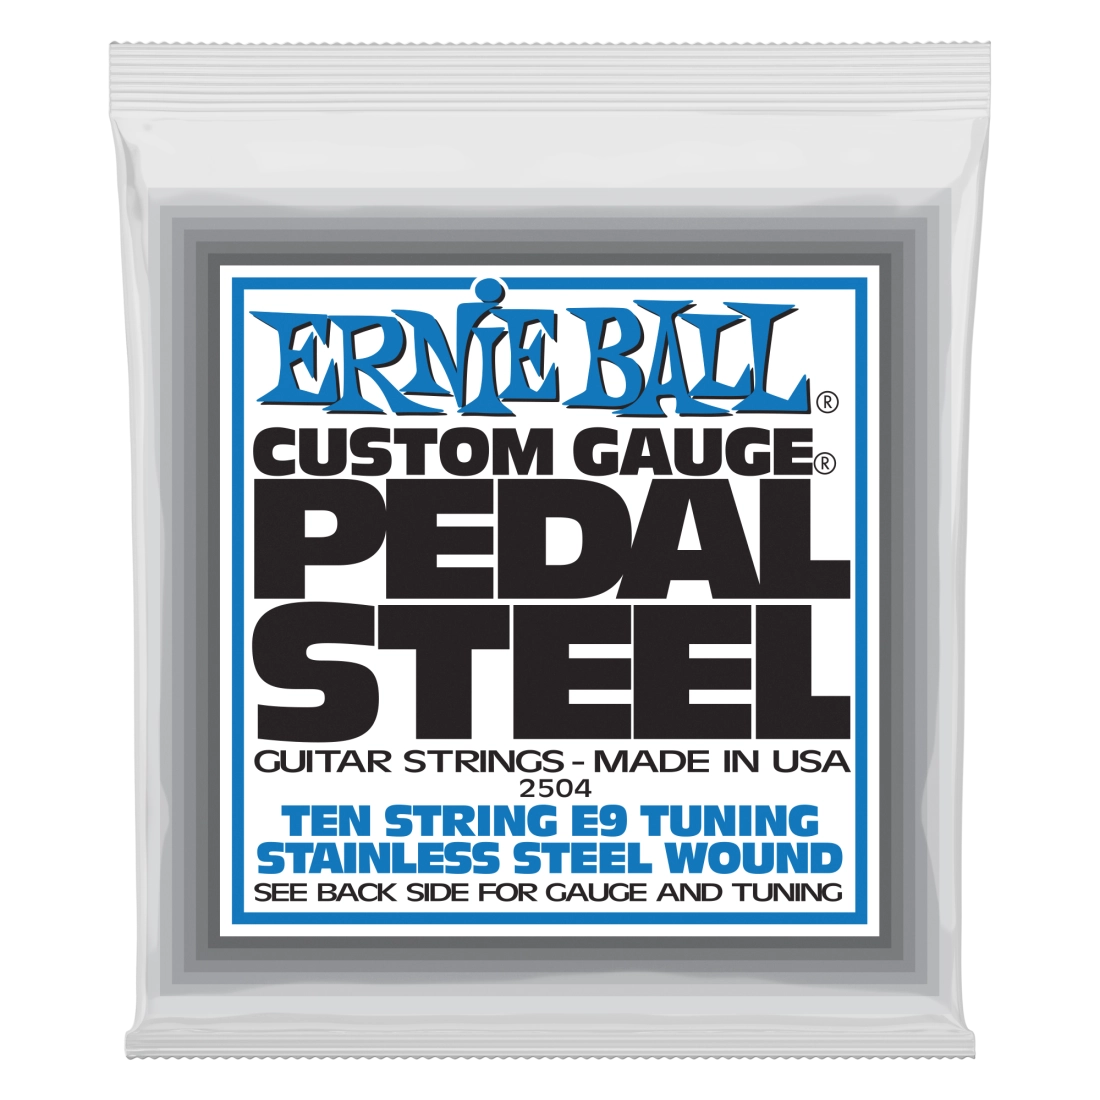 Ernie Ball Pedal Steel 10-String E9 Tuning Stainless Steel Wound Guitar Strings